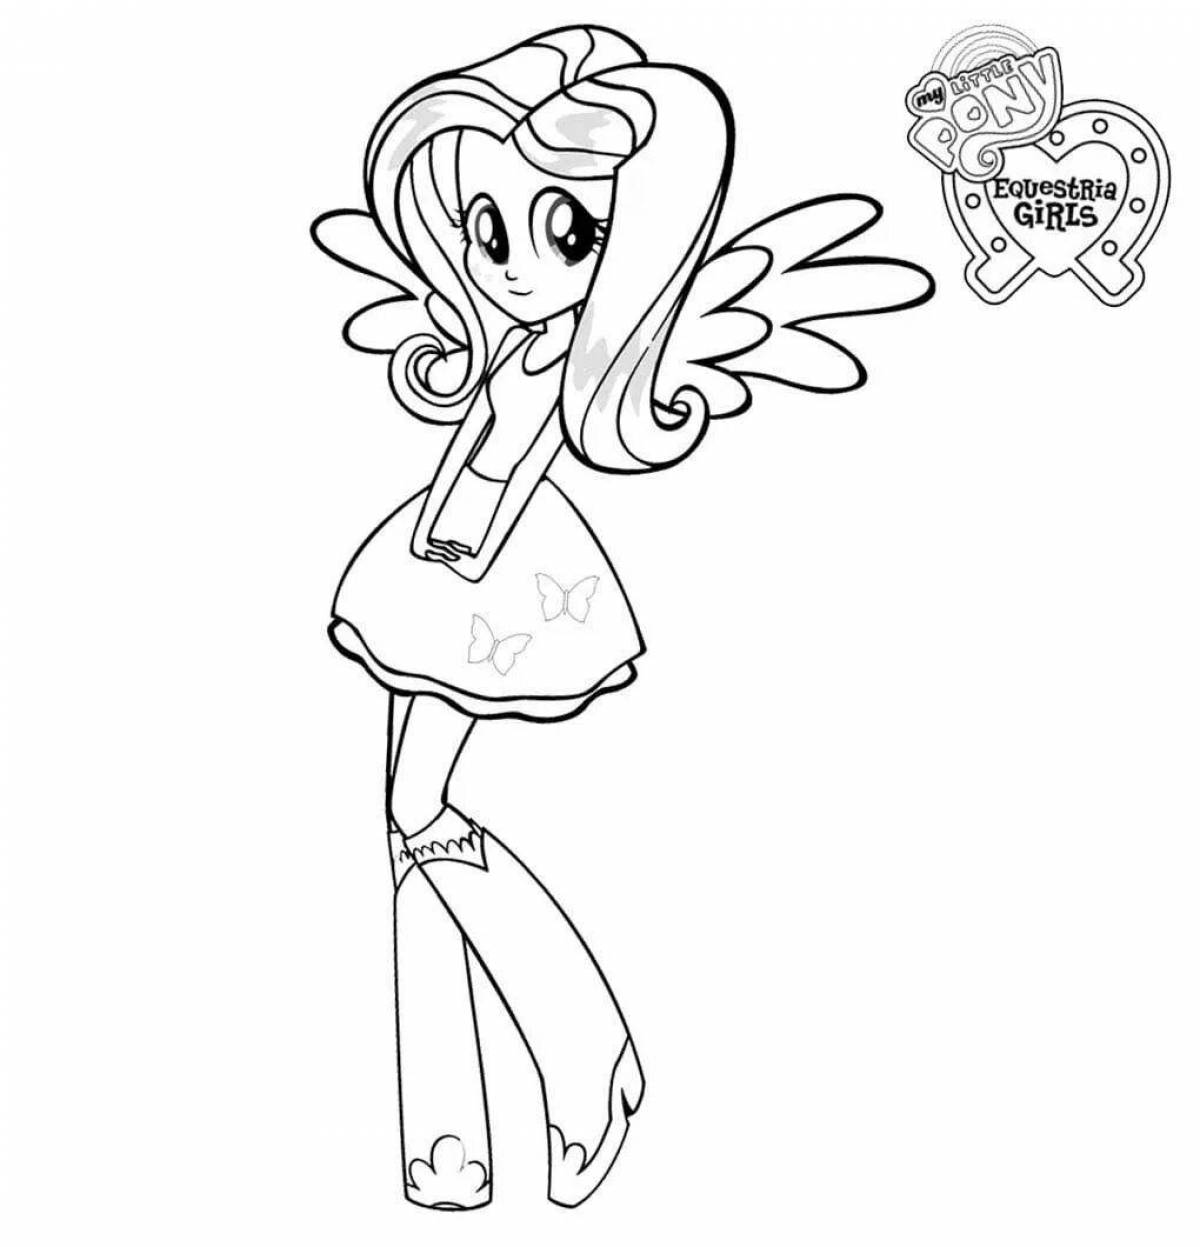 Equestria Awesome Girls Pinkie Pie Coloring Page